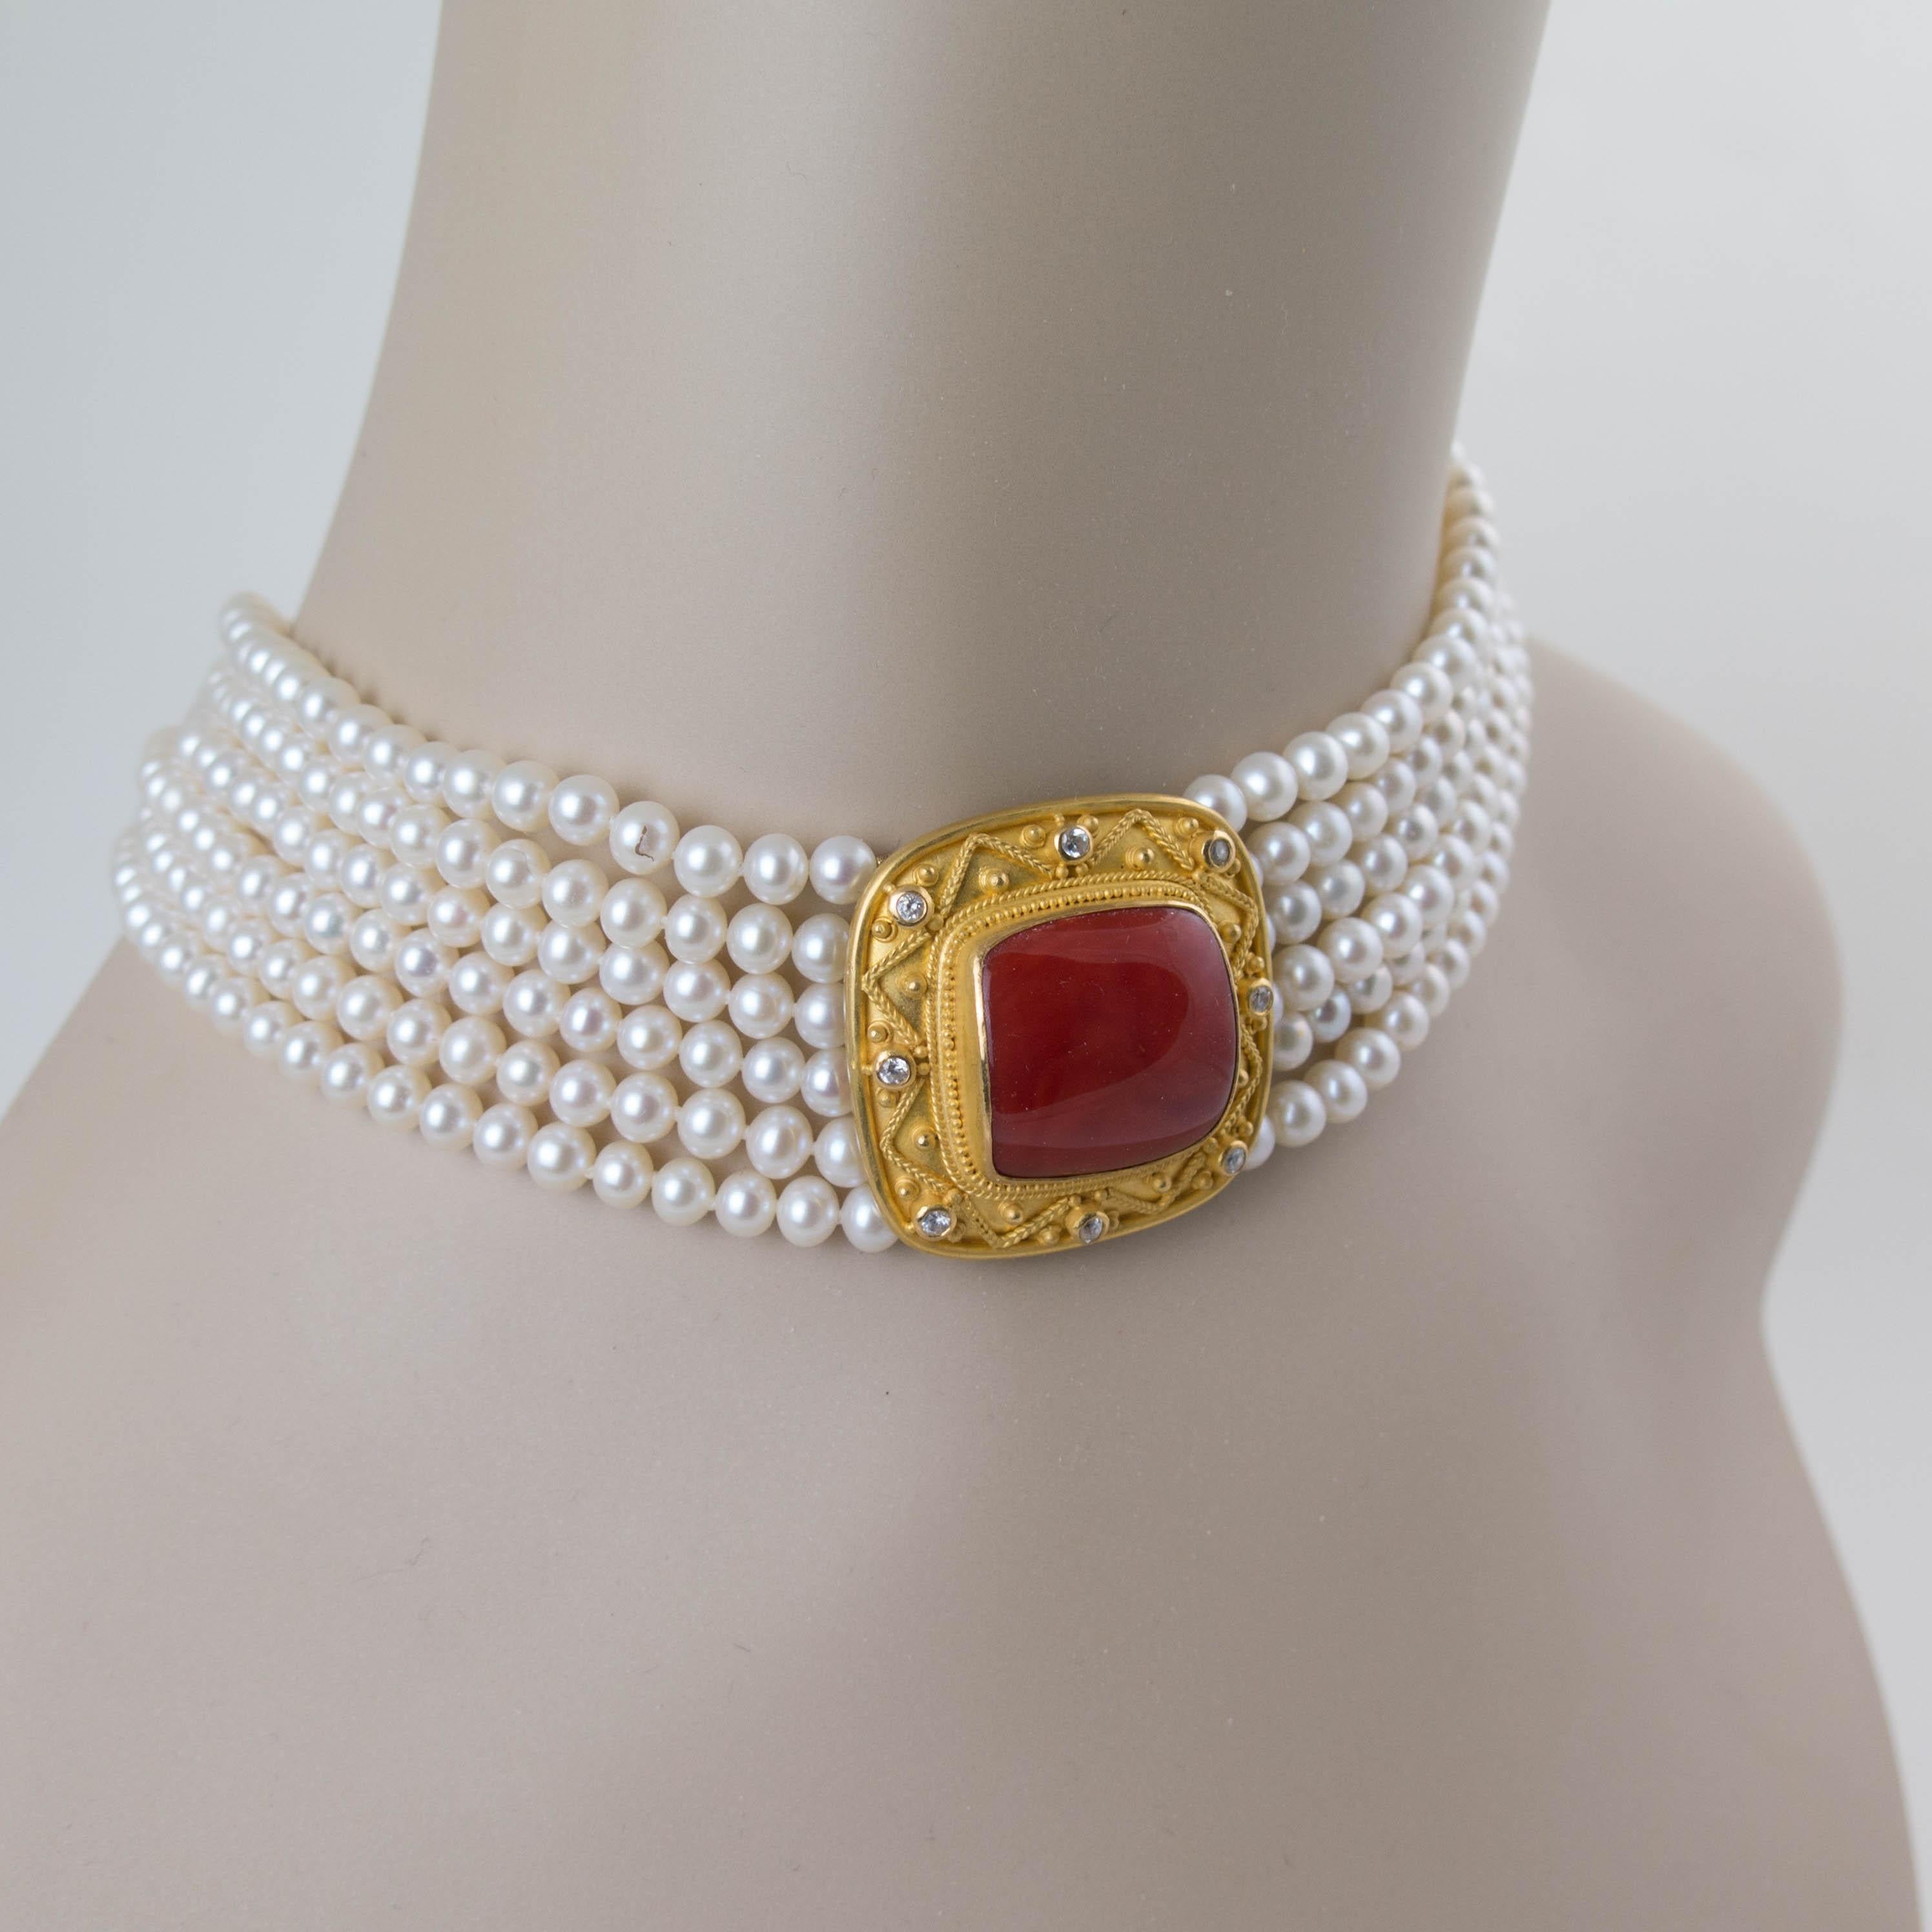 A bold pearl, coral, diamond and 22k yellow gold 